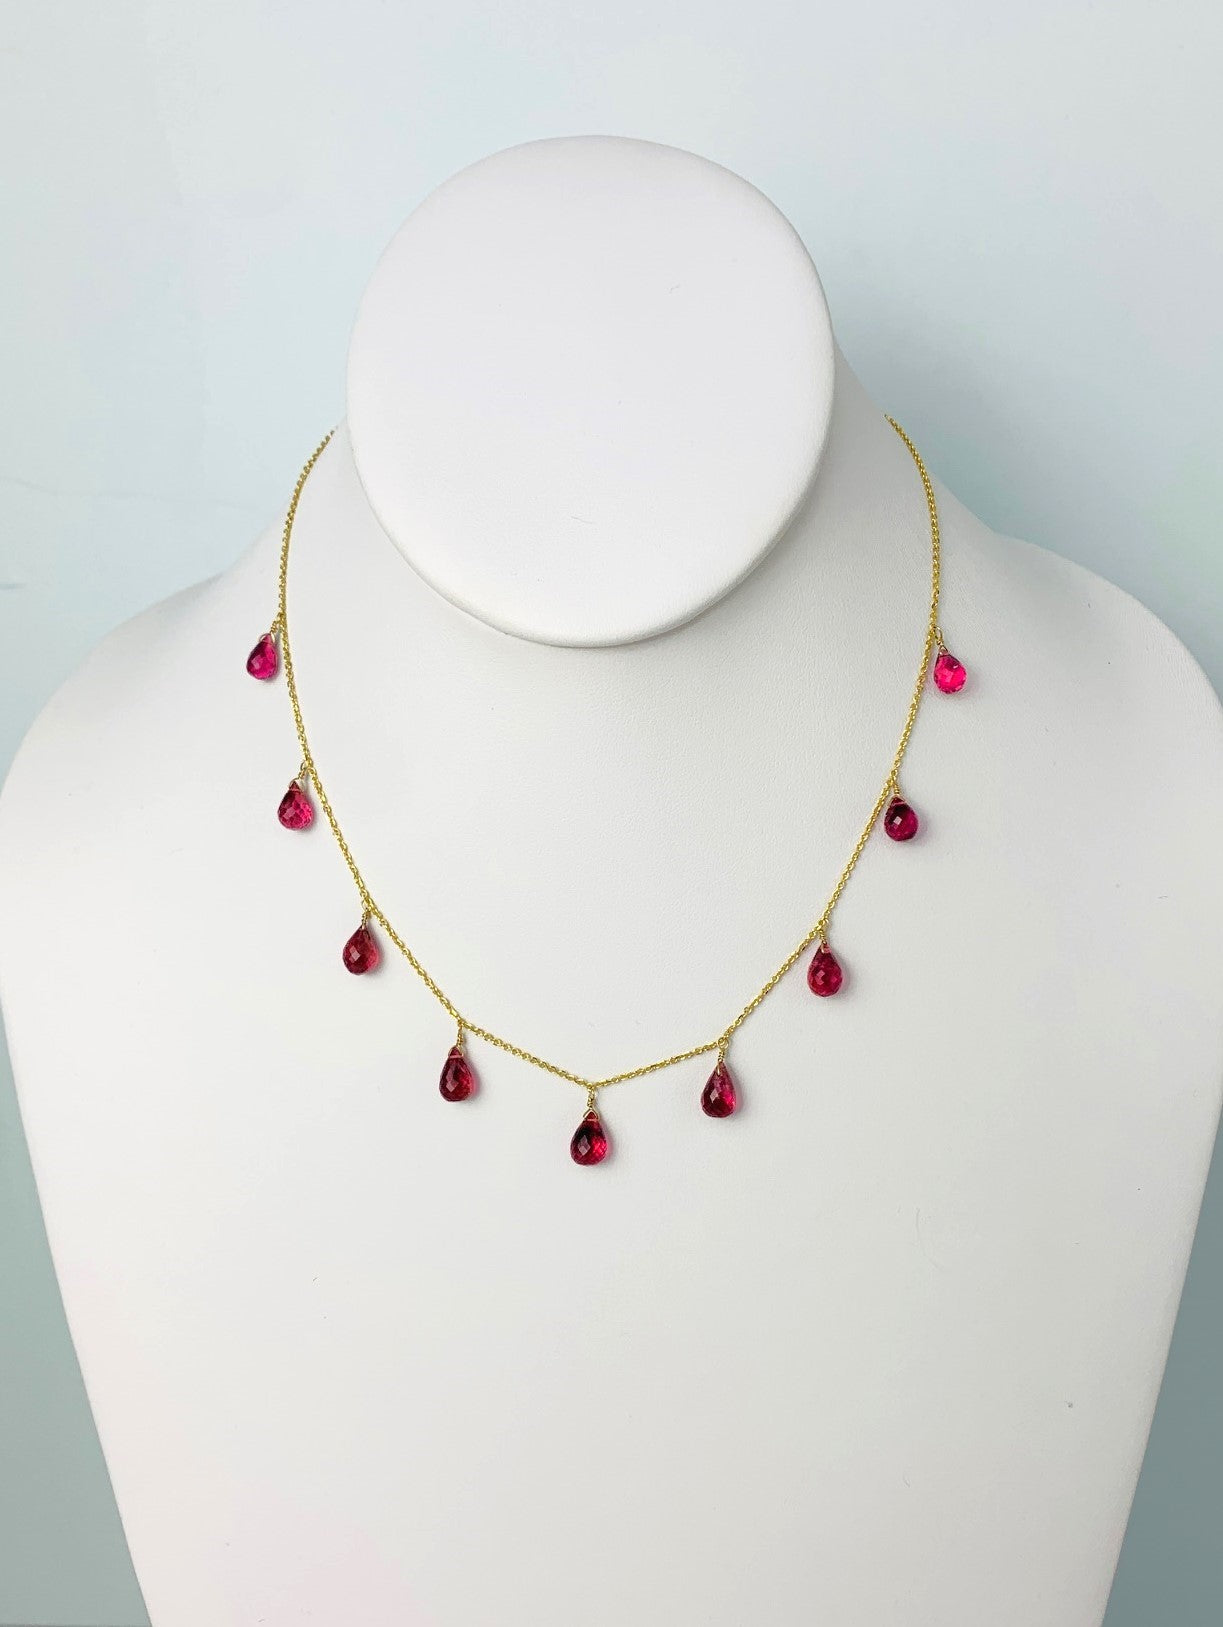 16" Pink Tourmaline 9 Station Dangly Necklace in 18KY - NCK-576-DNGGM18Y-PT-16